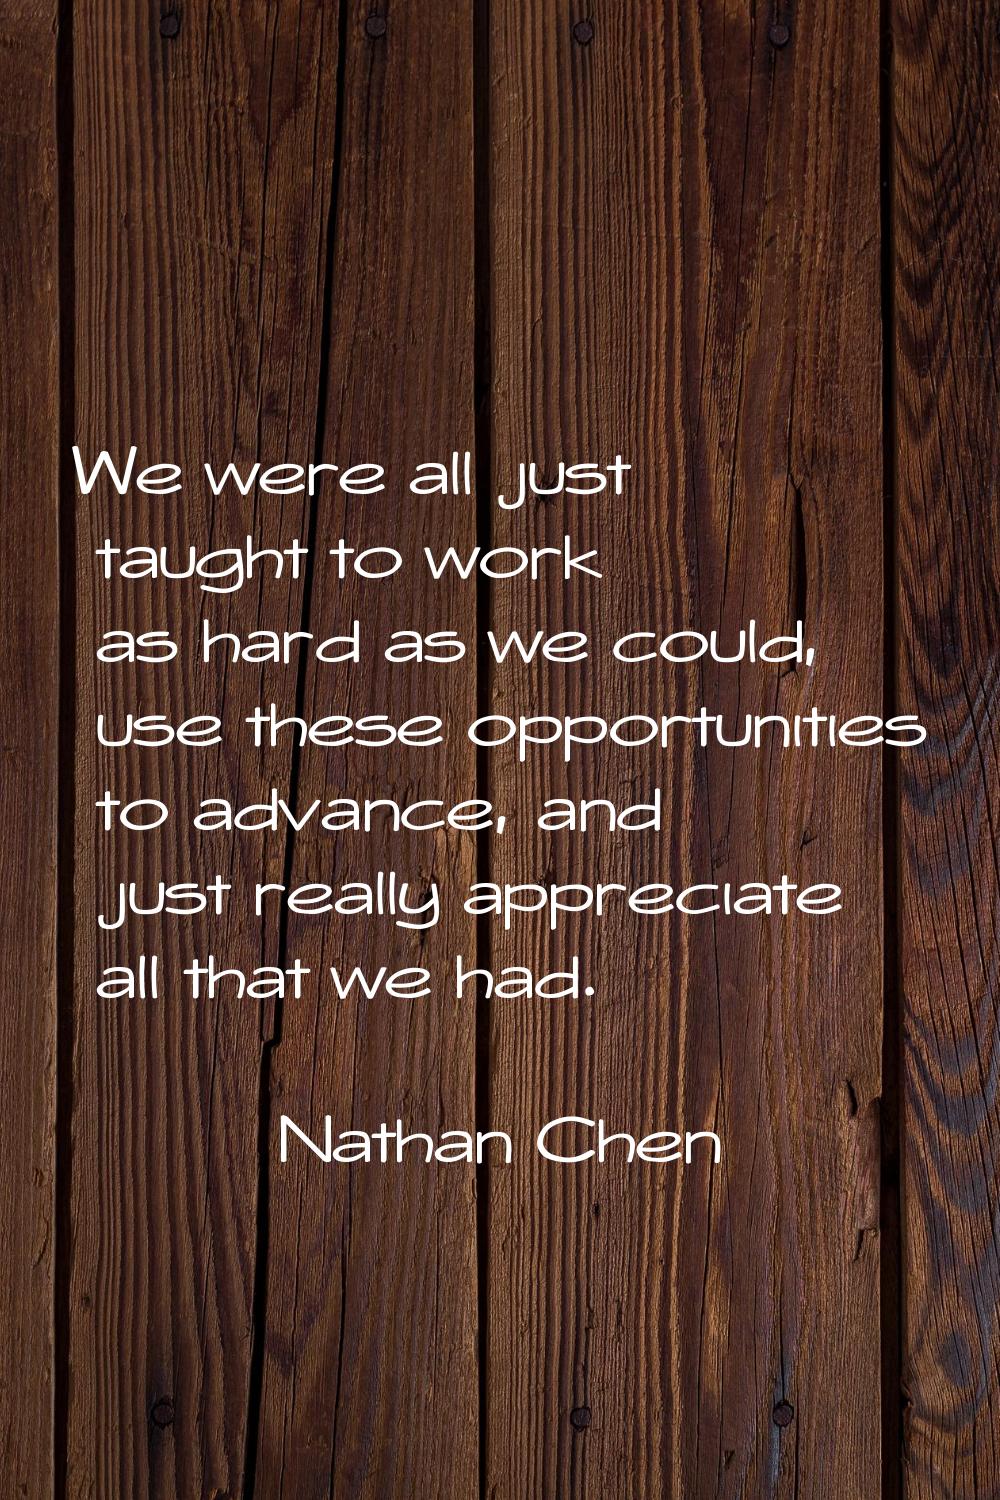 We were all just taught to work as hard as we could, use these opportunities to advance, and just r